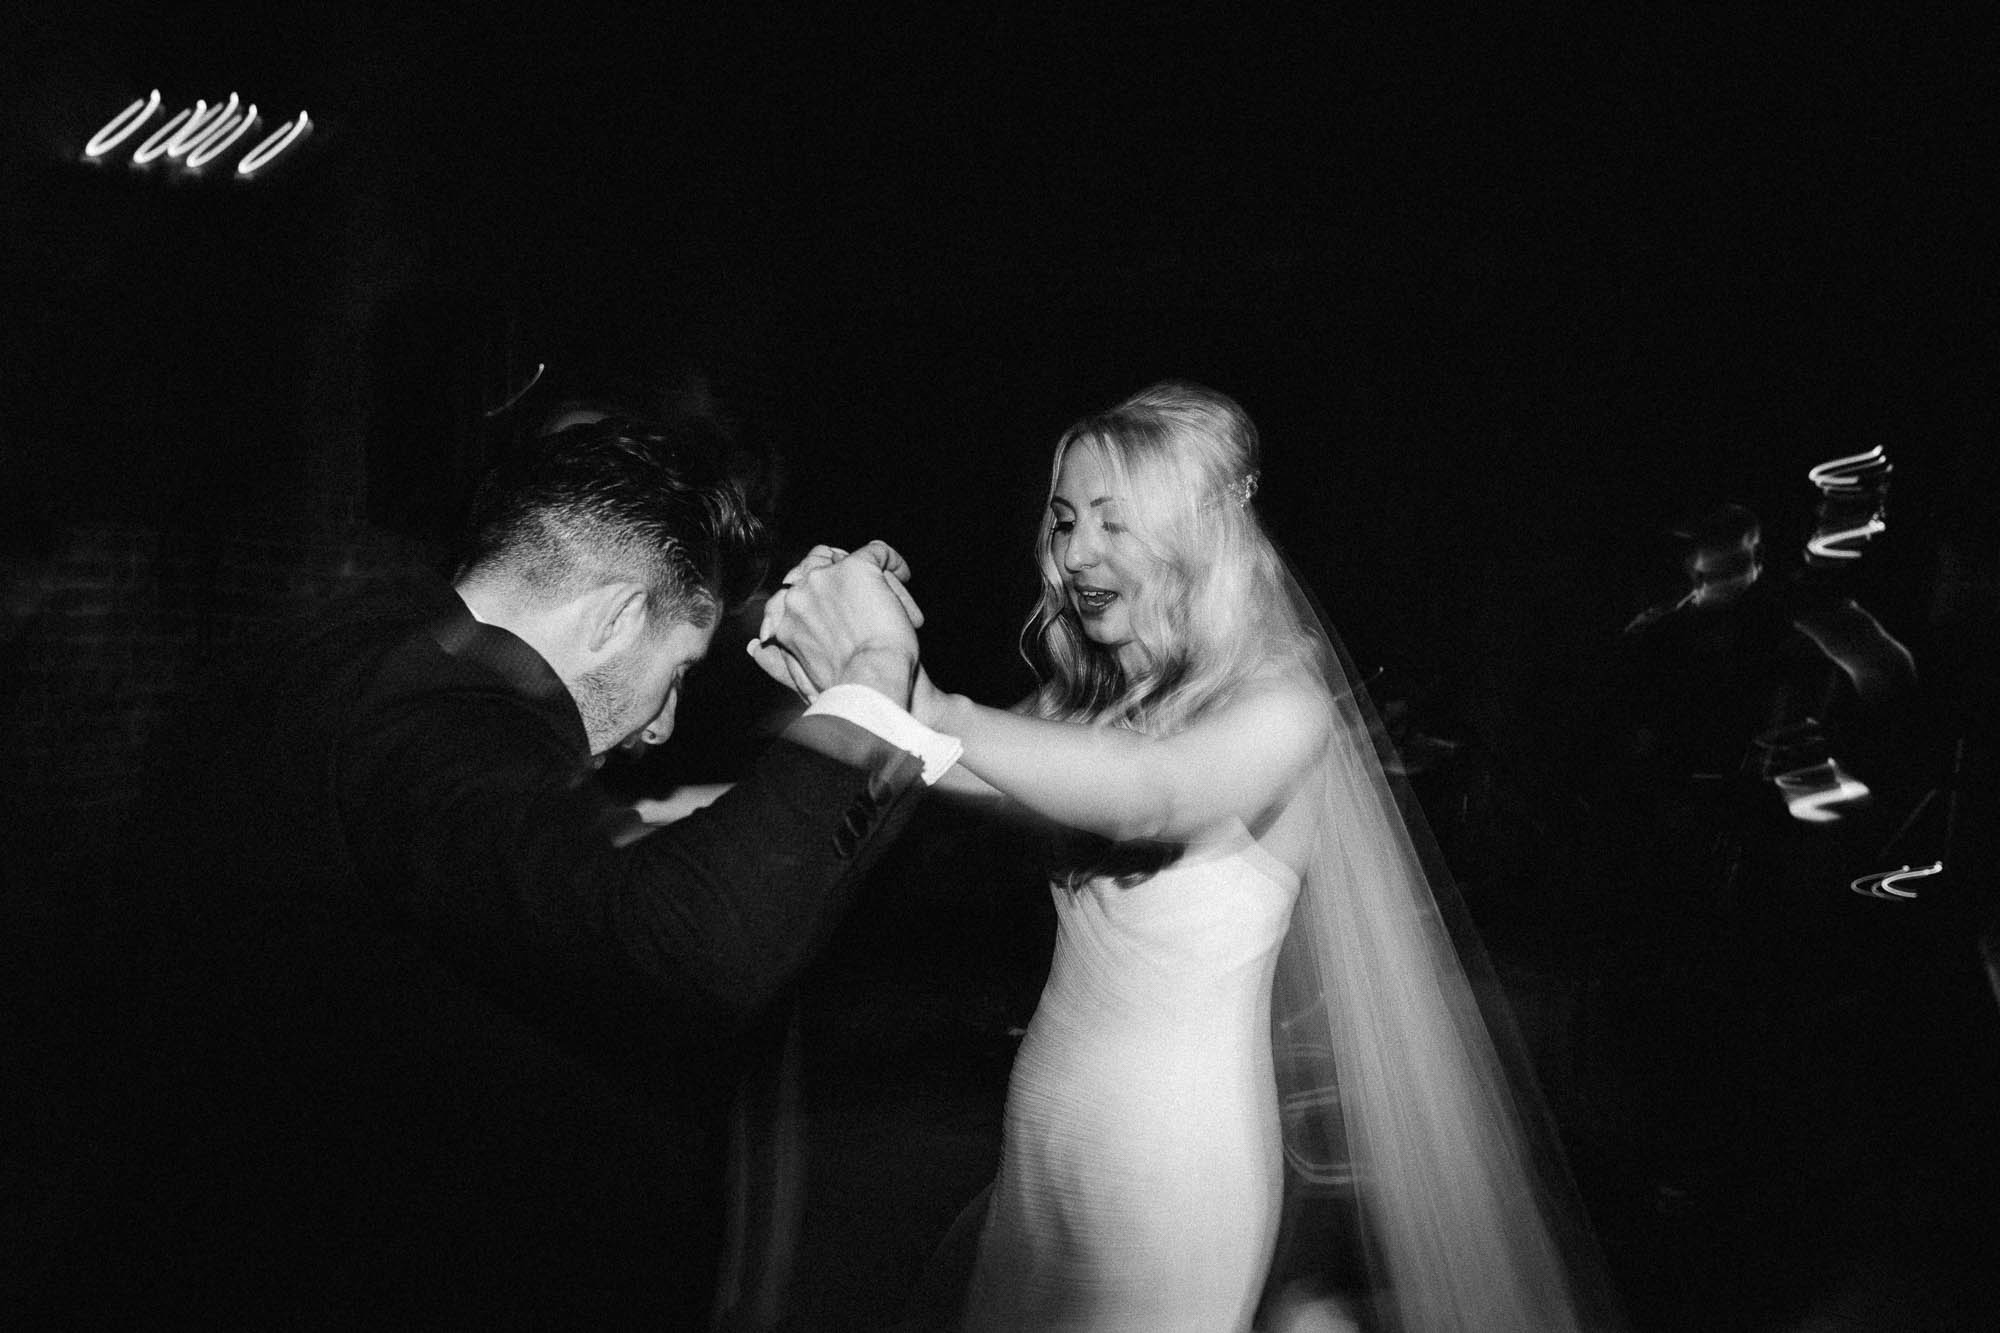 Black and white shot of newlyweds dancing on dancefloor at end of the night